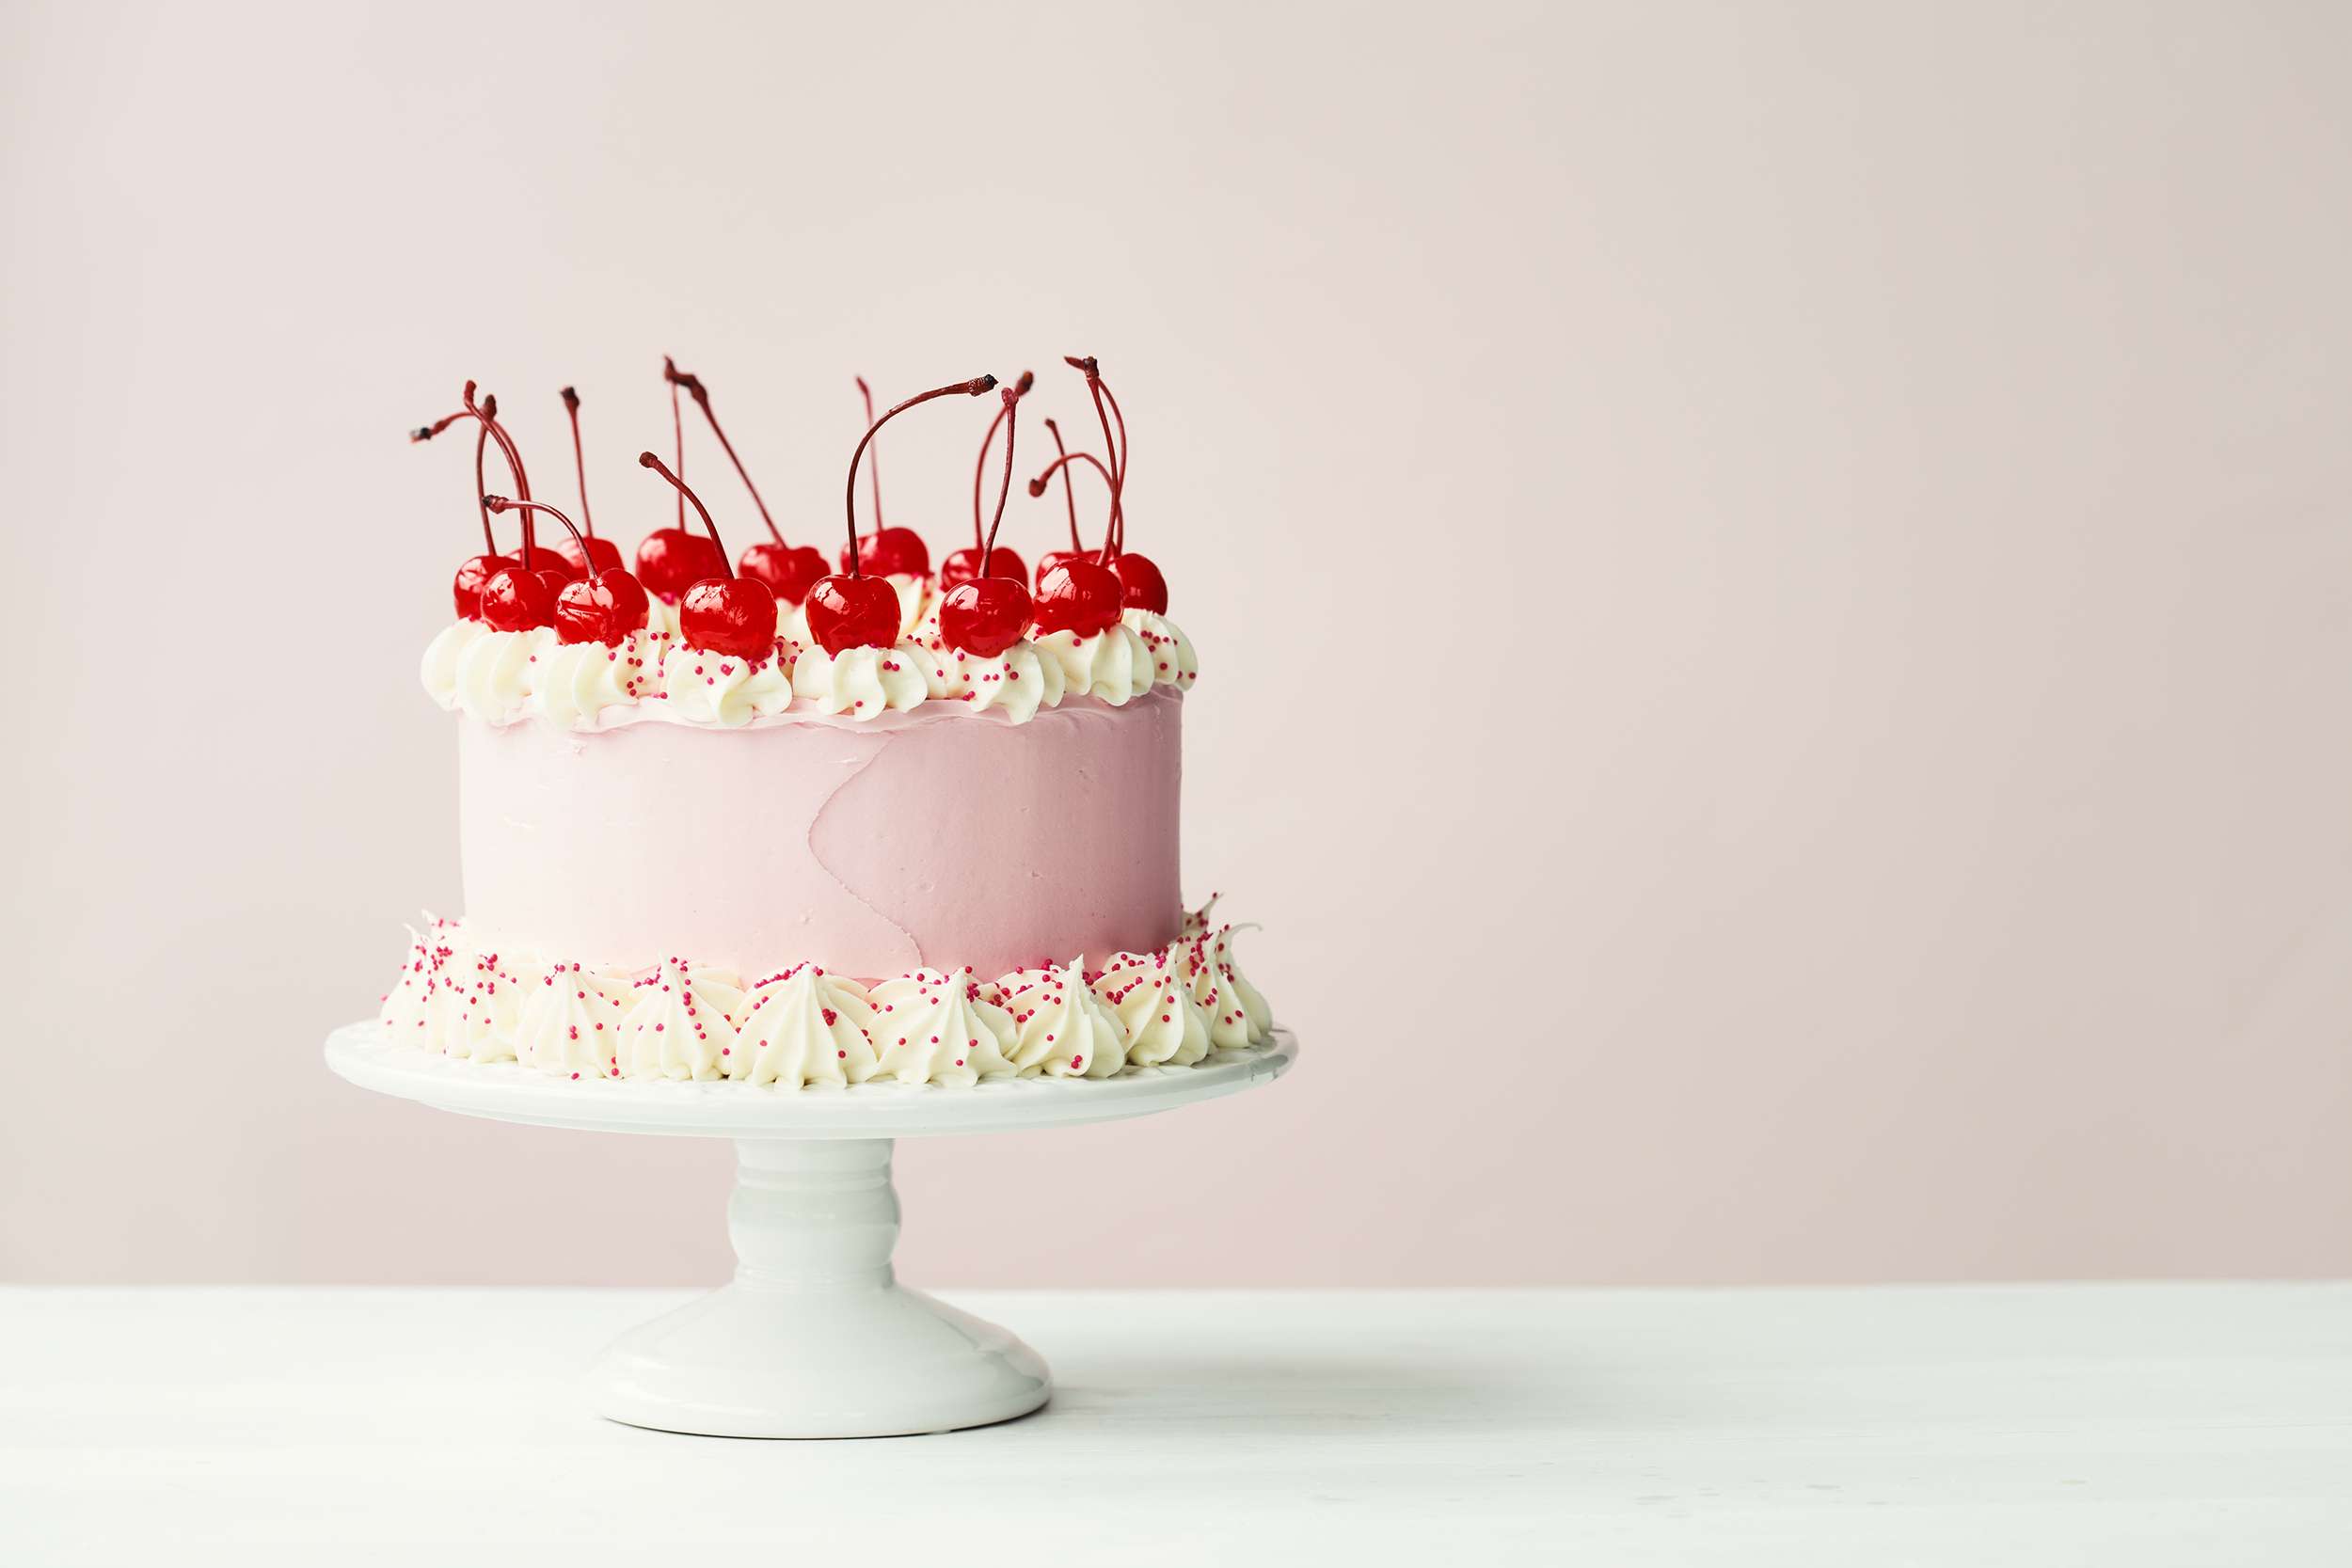 Why your logo is the icing on the cake